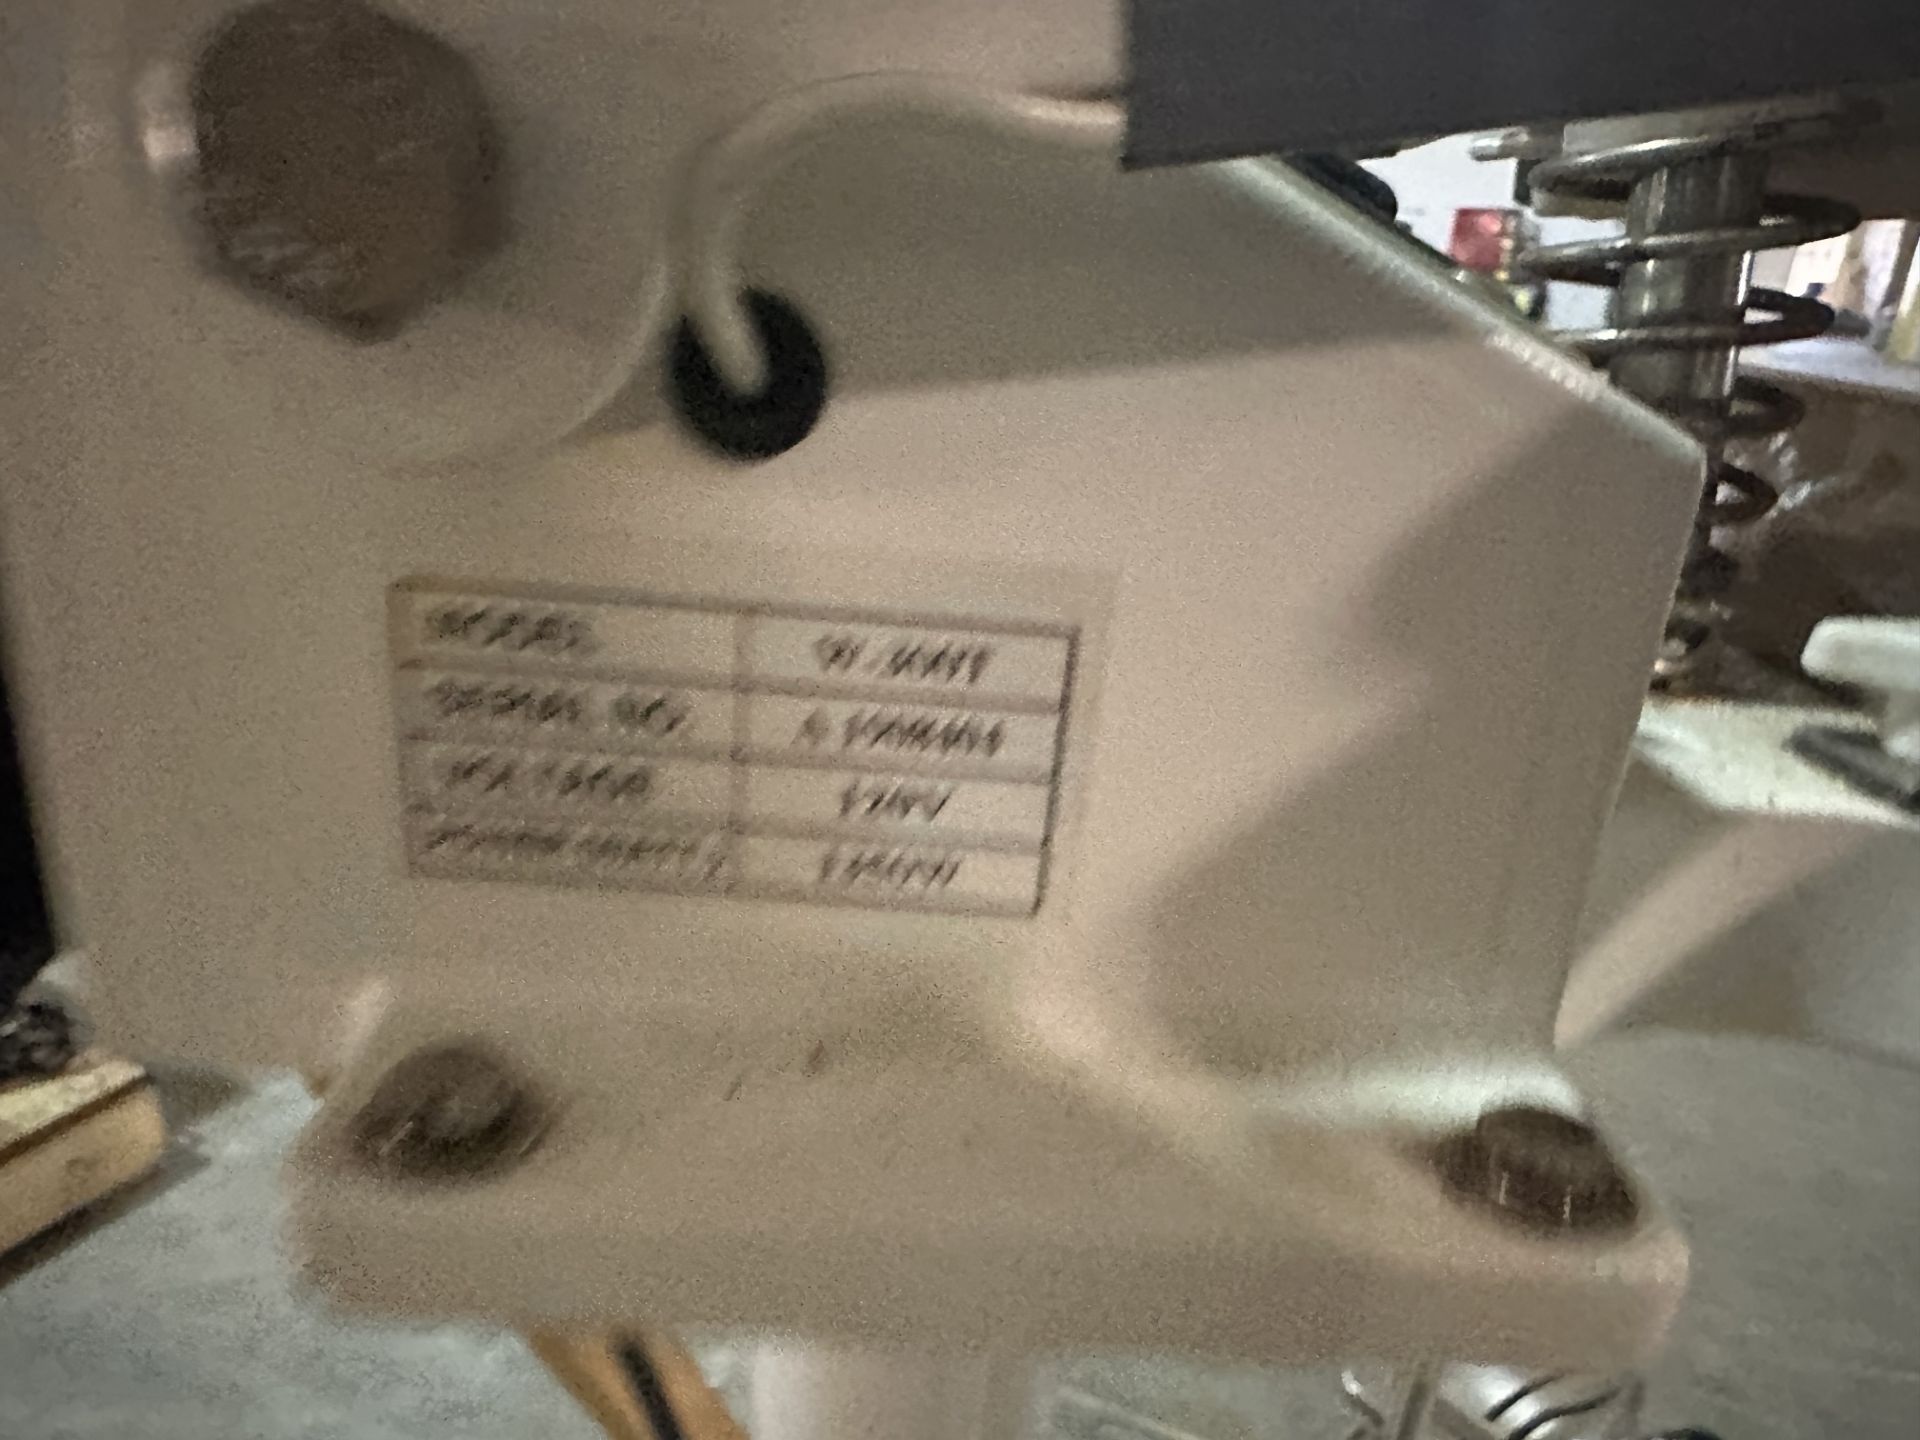 (Located in Quincy, FL) Continuous Band Sealer, Model# CBS-880, Serial# 1111120105615, 110V; Bag - Image 4 of 10